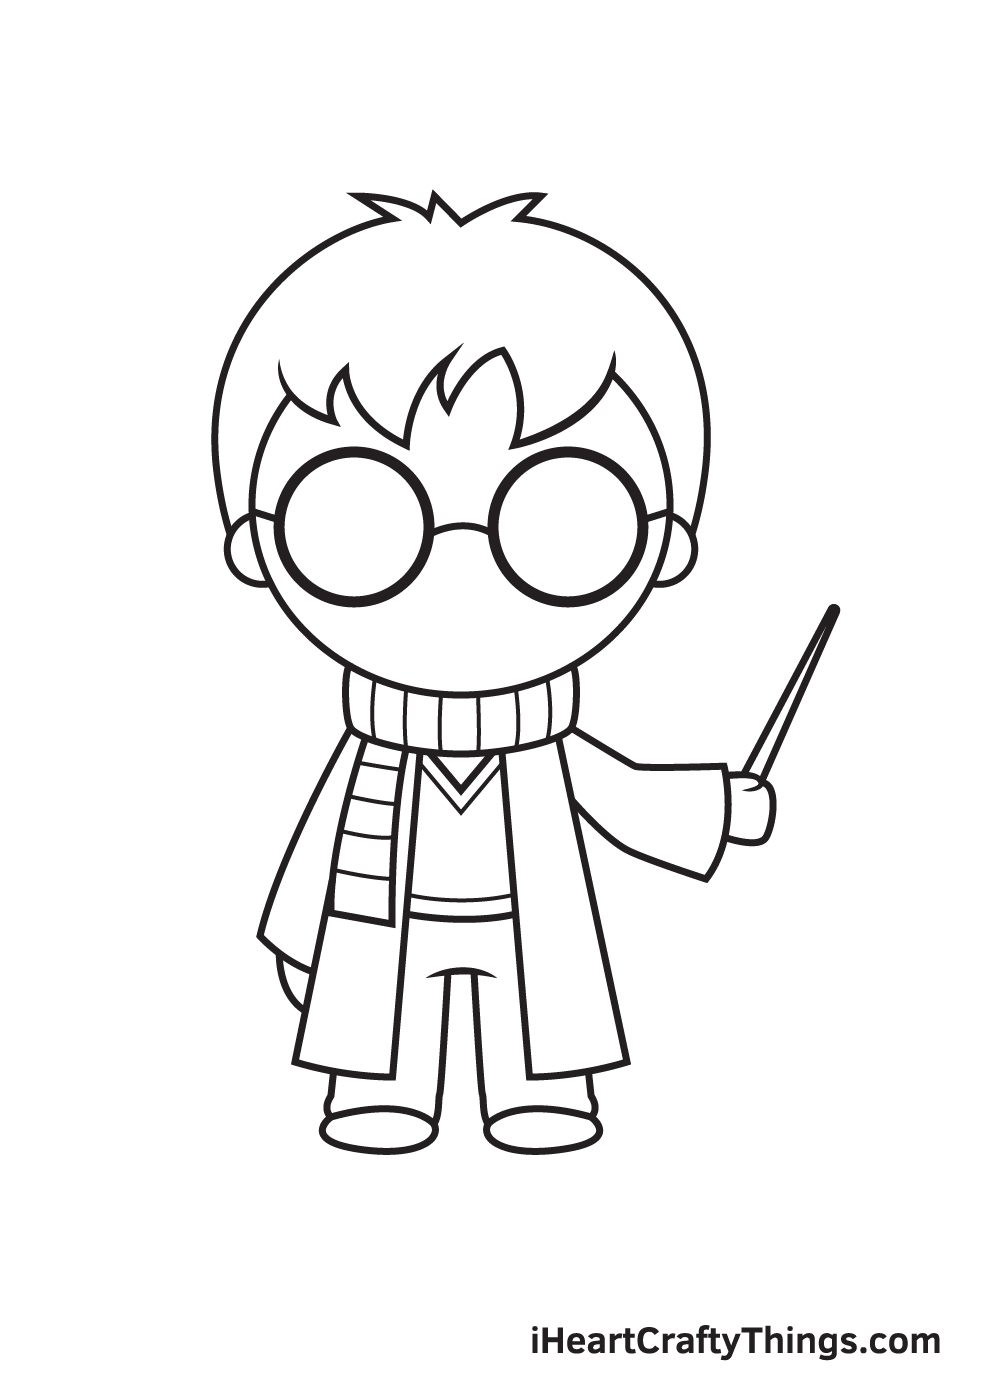 Harry Potter Drawing – Step 8